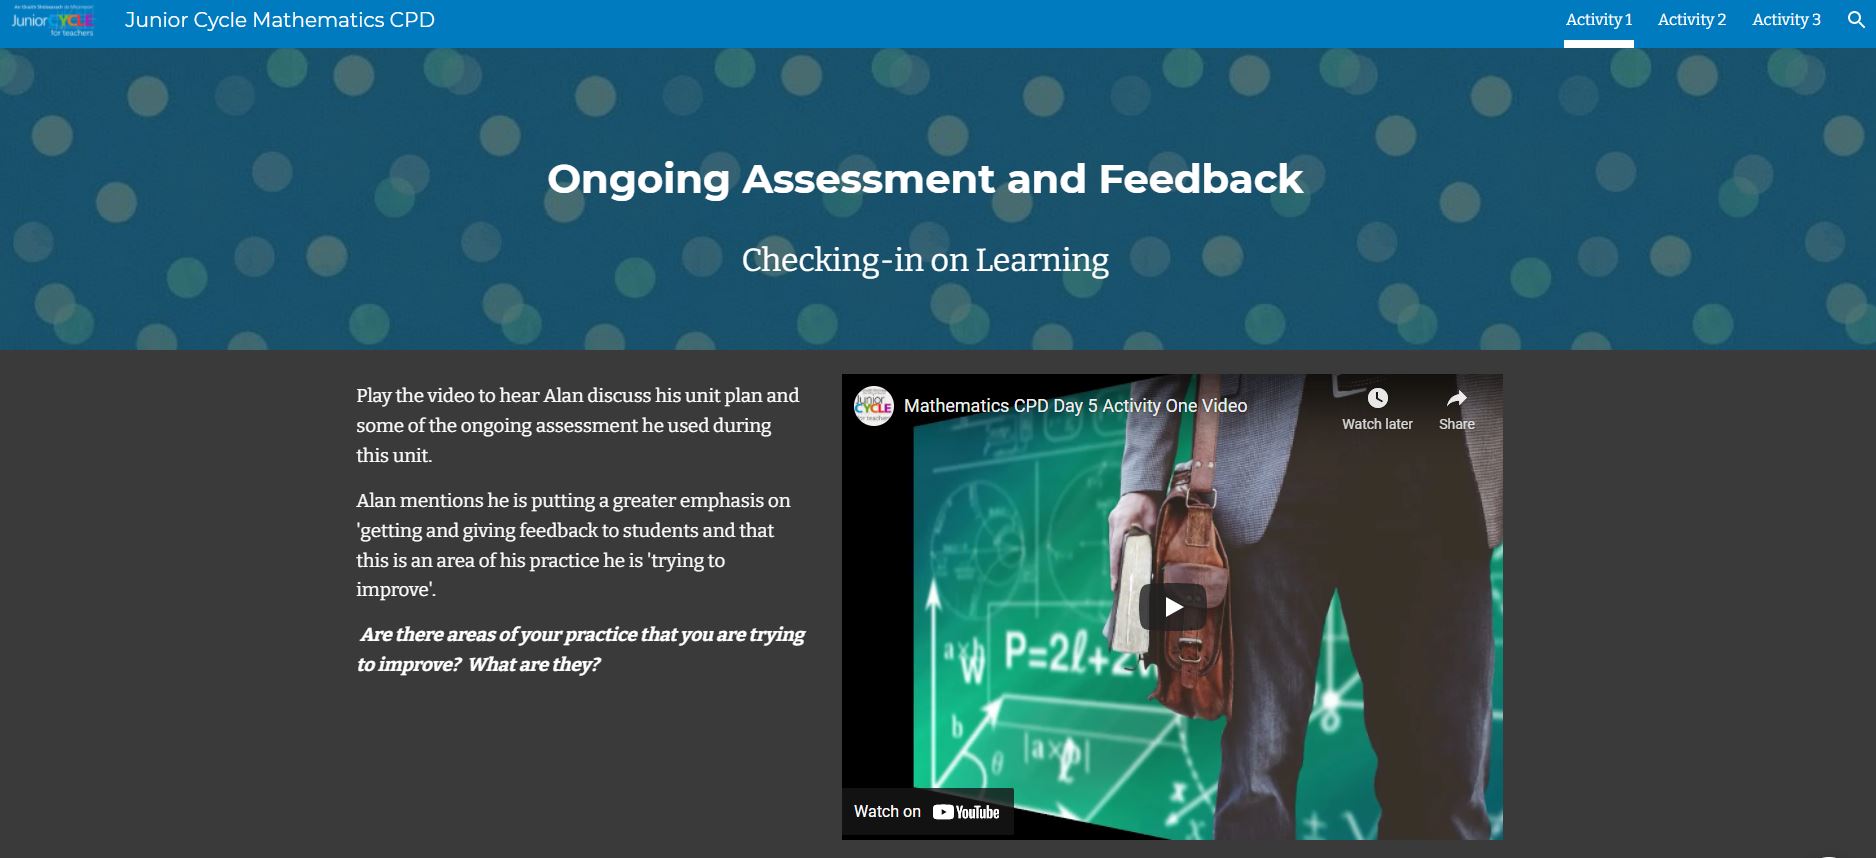 Ongoing Assessment and Feedback